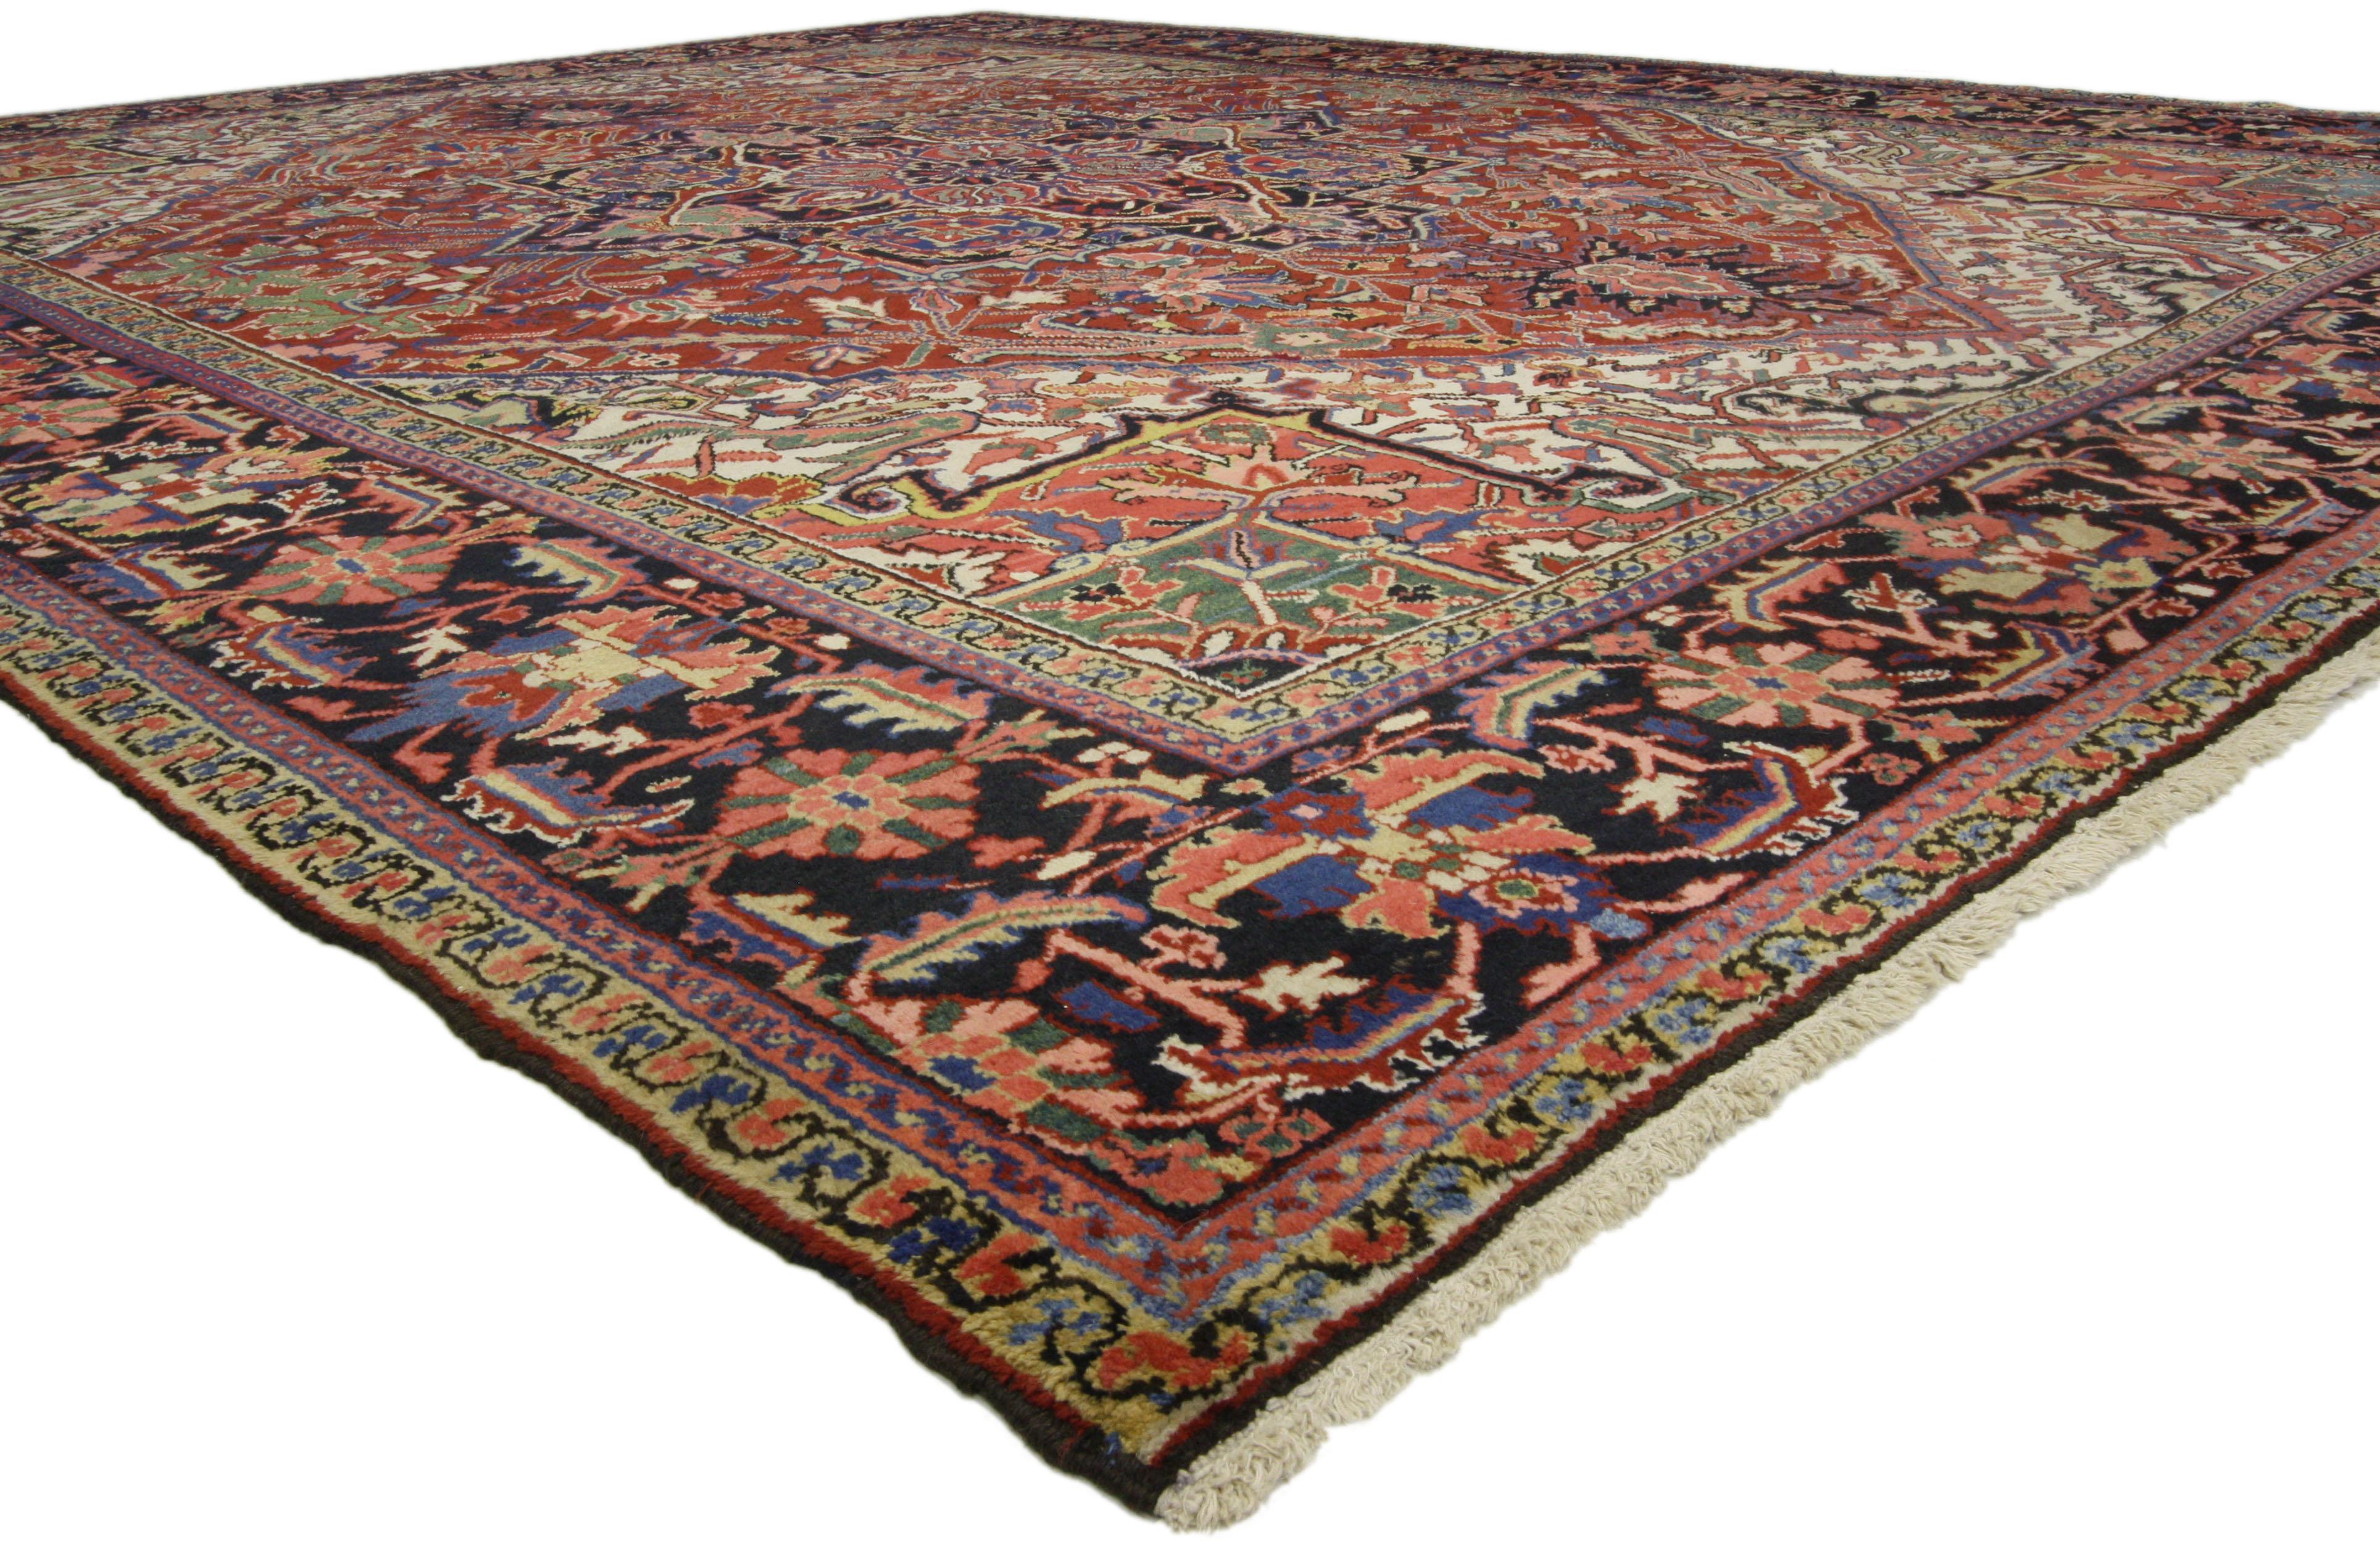 76651, traditional antique Persian Heriz rug with English Country style Manor House. This hand knotted wool antique Persian Heriz rug features a large octofoil medallion with palmette pendants floating in the center of an abrashed brick red field.